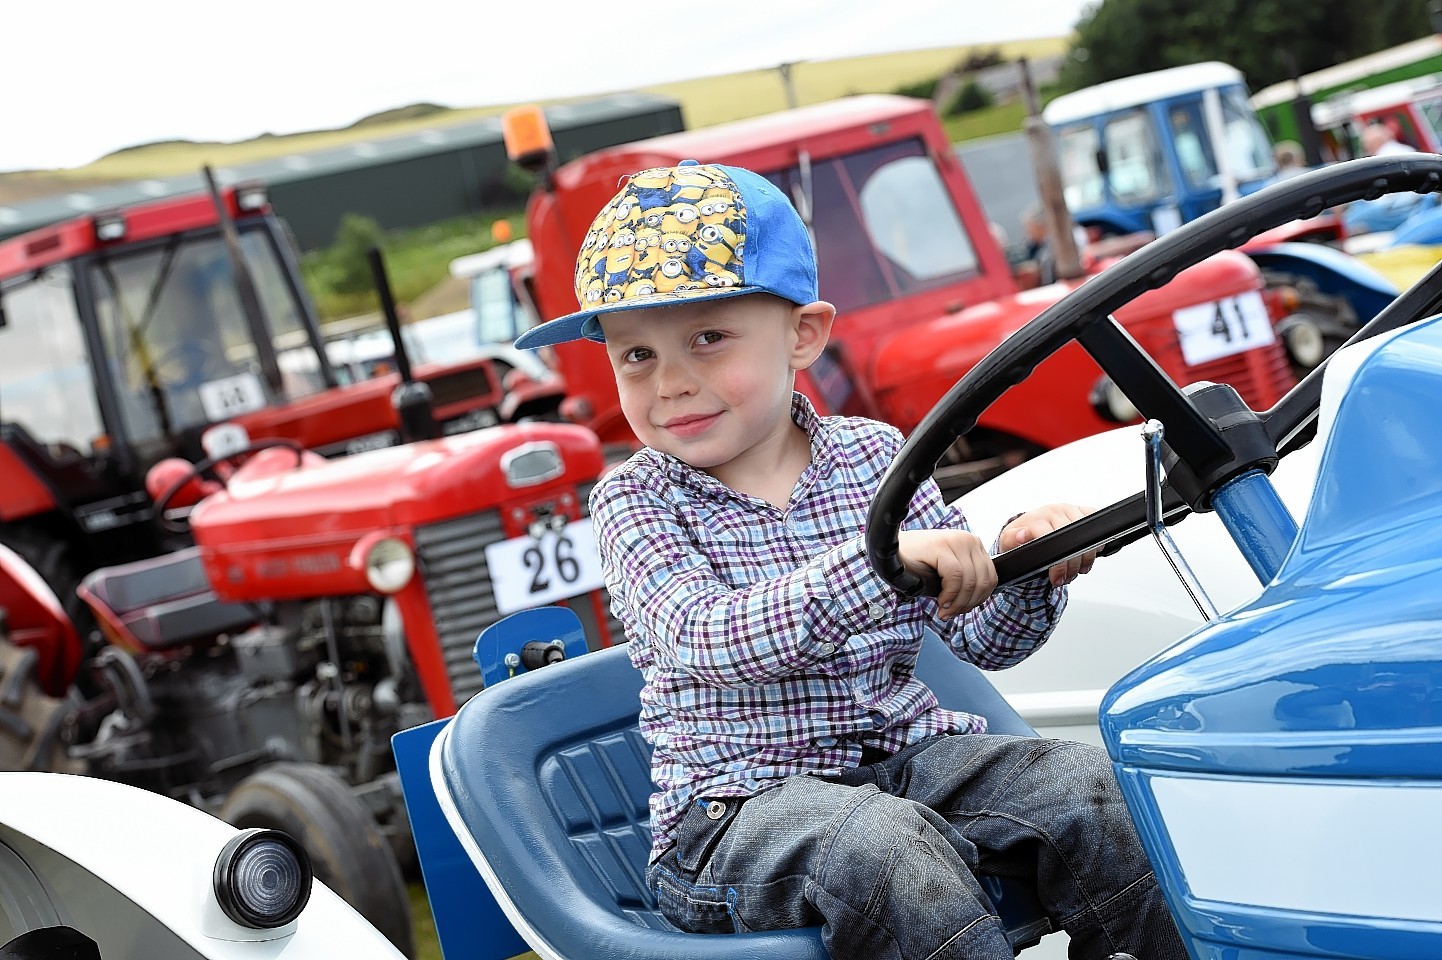 Spectators of all ages enjoyed the show, including Jamie McIntosh from Turriff in his grandad's Ford tractor 